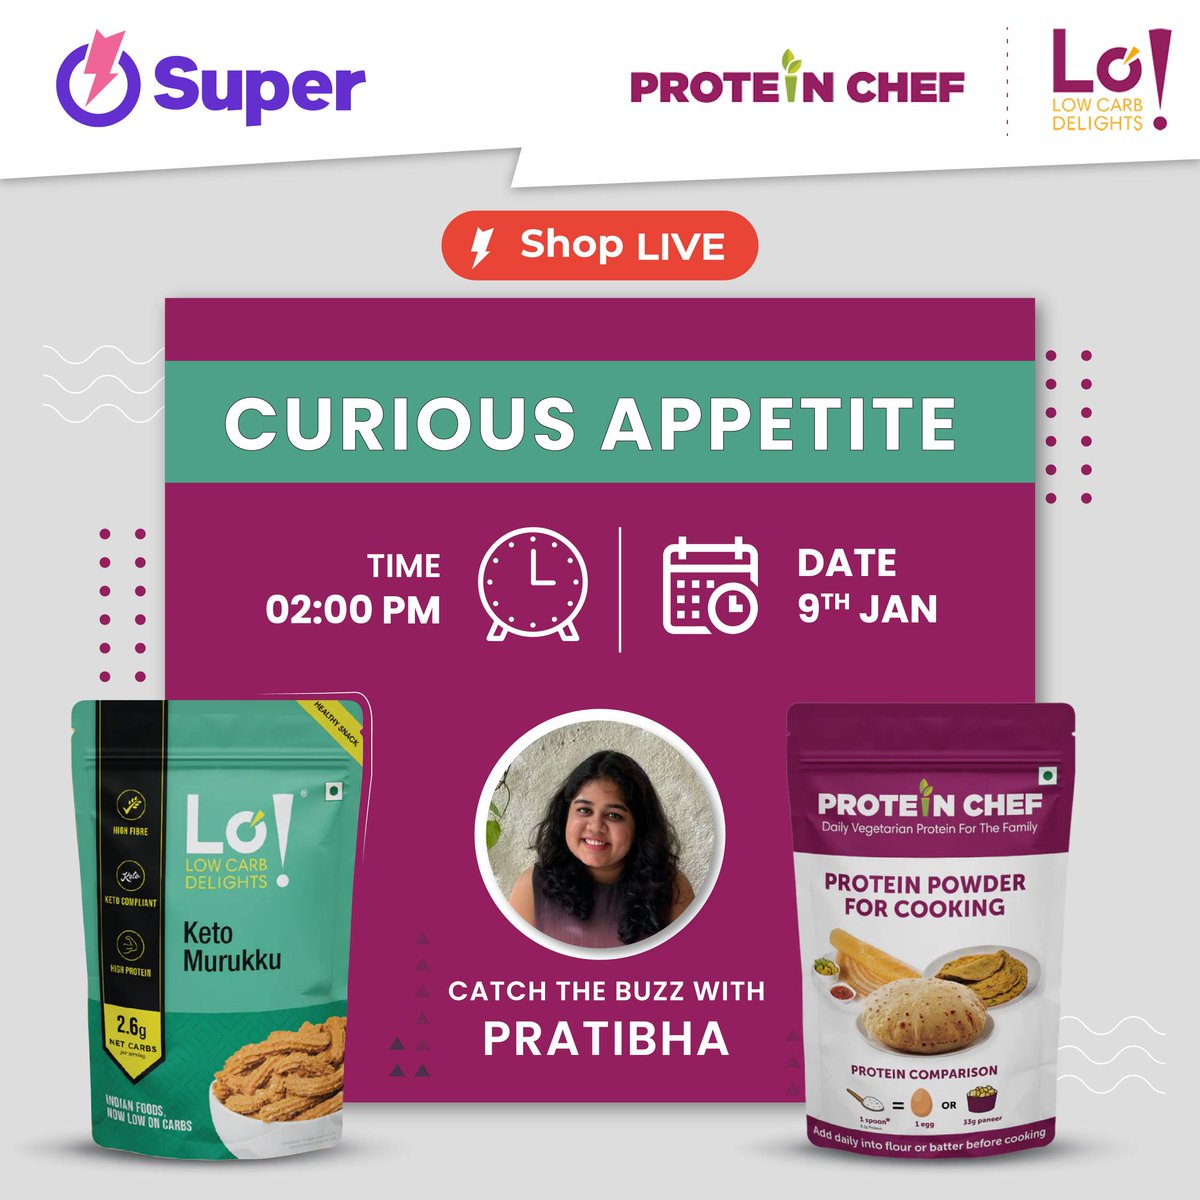 Keto Diet made easy with a range of healthy and tasty foods from @LoFoods  😋 Get yours today only on super 🔥

To know more catch us live on the Super App🔥

Sign in from the link in the bio and get Rs 50 in your wallet🥳

Live streaming at - 2pm
Date - 09 Jan

#live #super